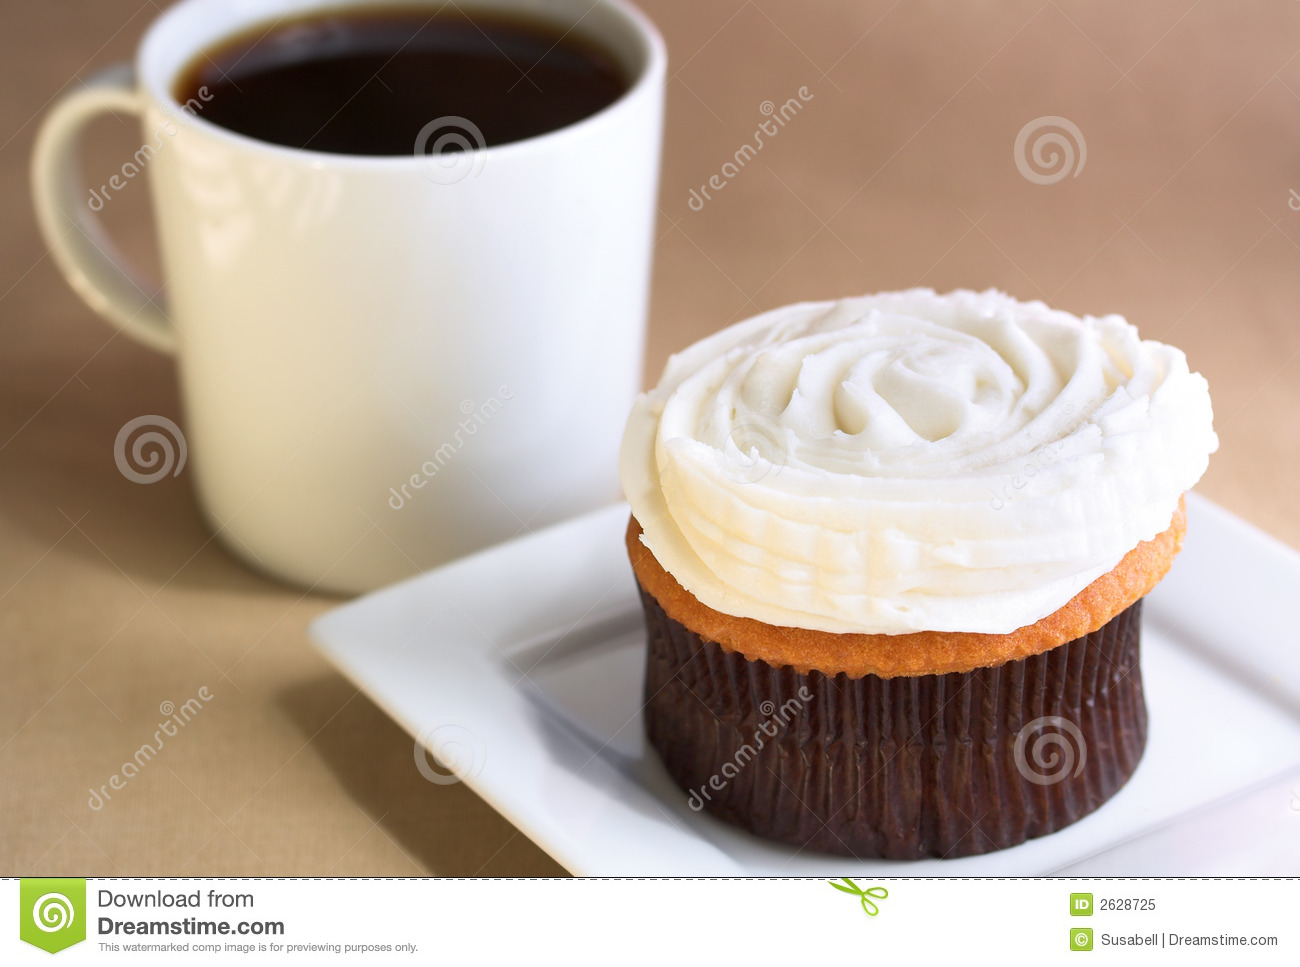 Cupcake With Coffee Royalty Free Stock Photo   Image  2628725